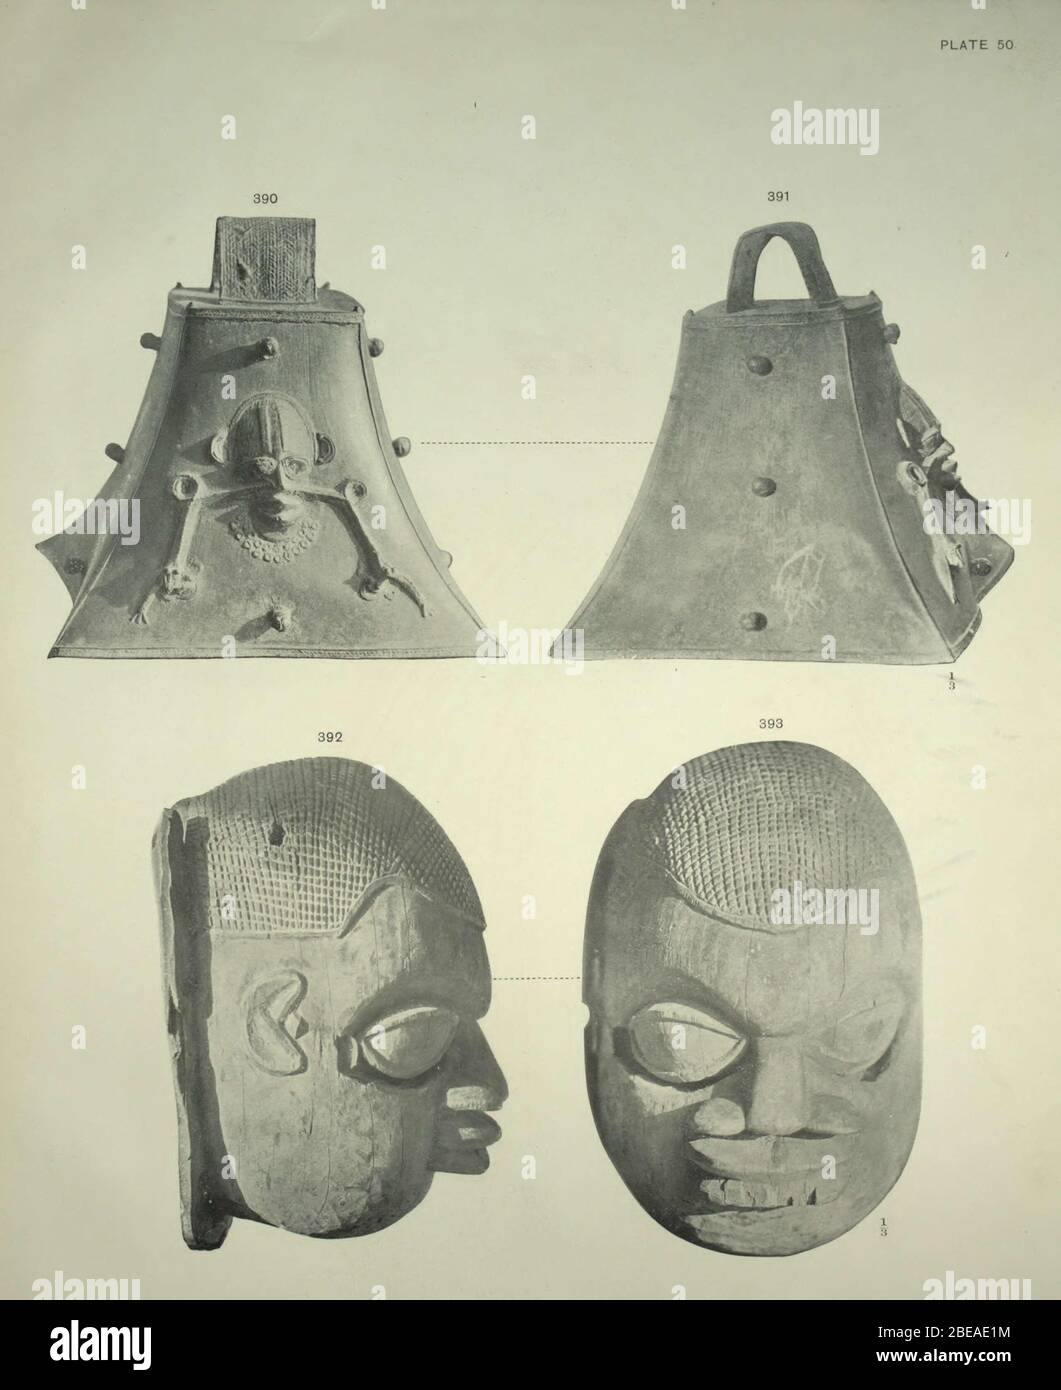 'English: DESCRIPTION OF PLATE L. Figs. 390 and 391.--Large metal bell. On one side is a human face in relief, with snakes issuing from the nostrils. Each of the two snakes grasps a mud or cat fish in its jaws. The ears project from the sides of the head-dress, and the neck has a frill consisting of a double row of perforated circles. The handle has an incised herring-bone ornamentation. Projecting from the sides of the bell are eight knobs. The base and crown of the bell have a border of strap-work pattern. Height of bell, 10 inches. Figs. 392 and 393.--Carved wooden head, which may have been Stock Photo